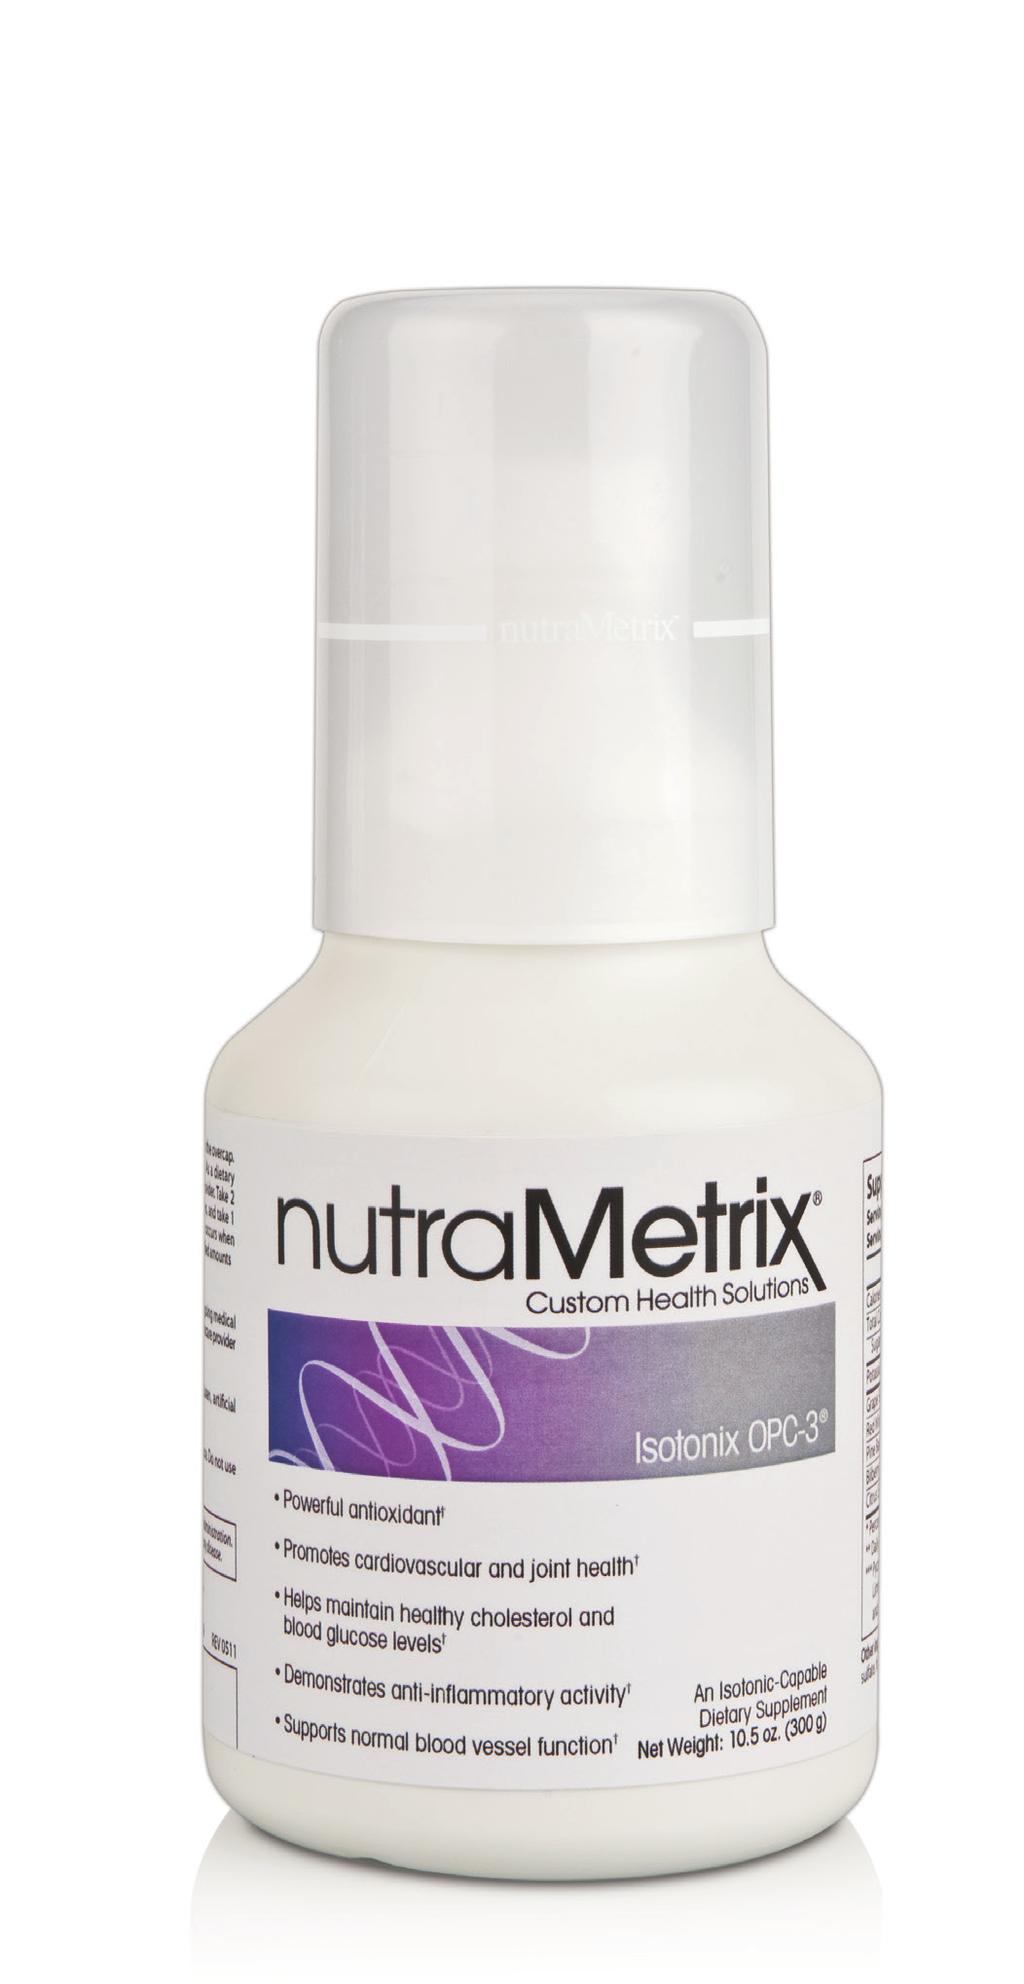 nutrametrix Isotonix OPC-3 Powerful antioxidant Promotes cardiovascular and joint health Helps maintain healthy cholesterol and blood glucose levels Demonstrates anti-inflammatory activity Supports